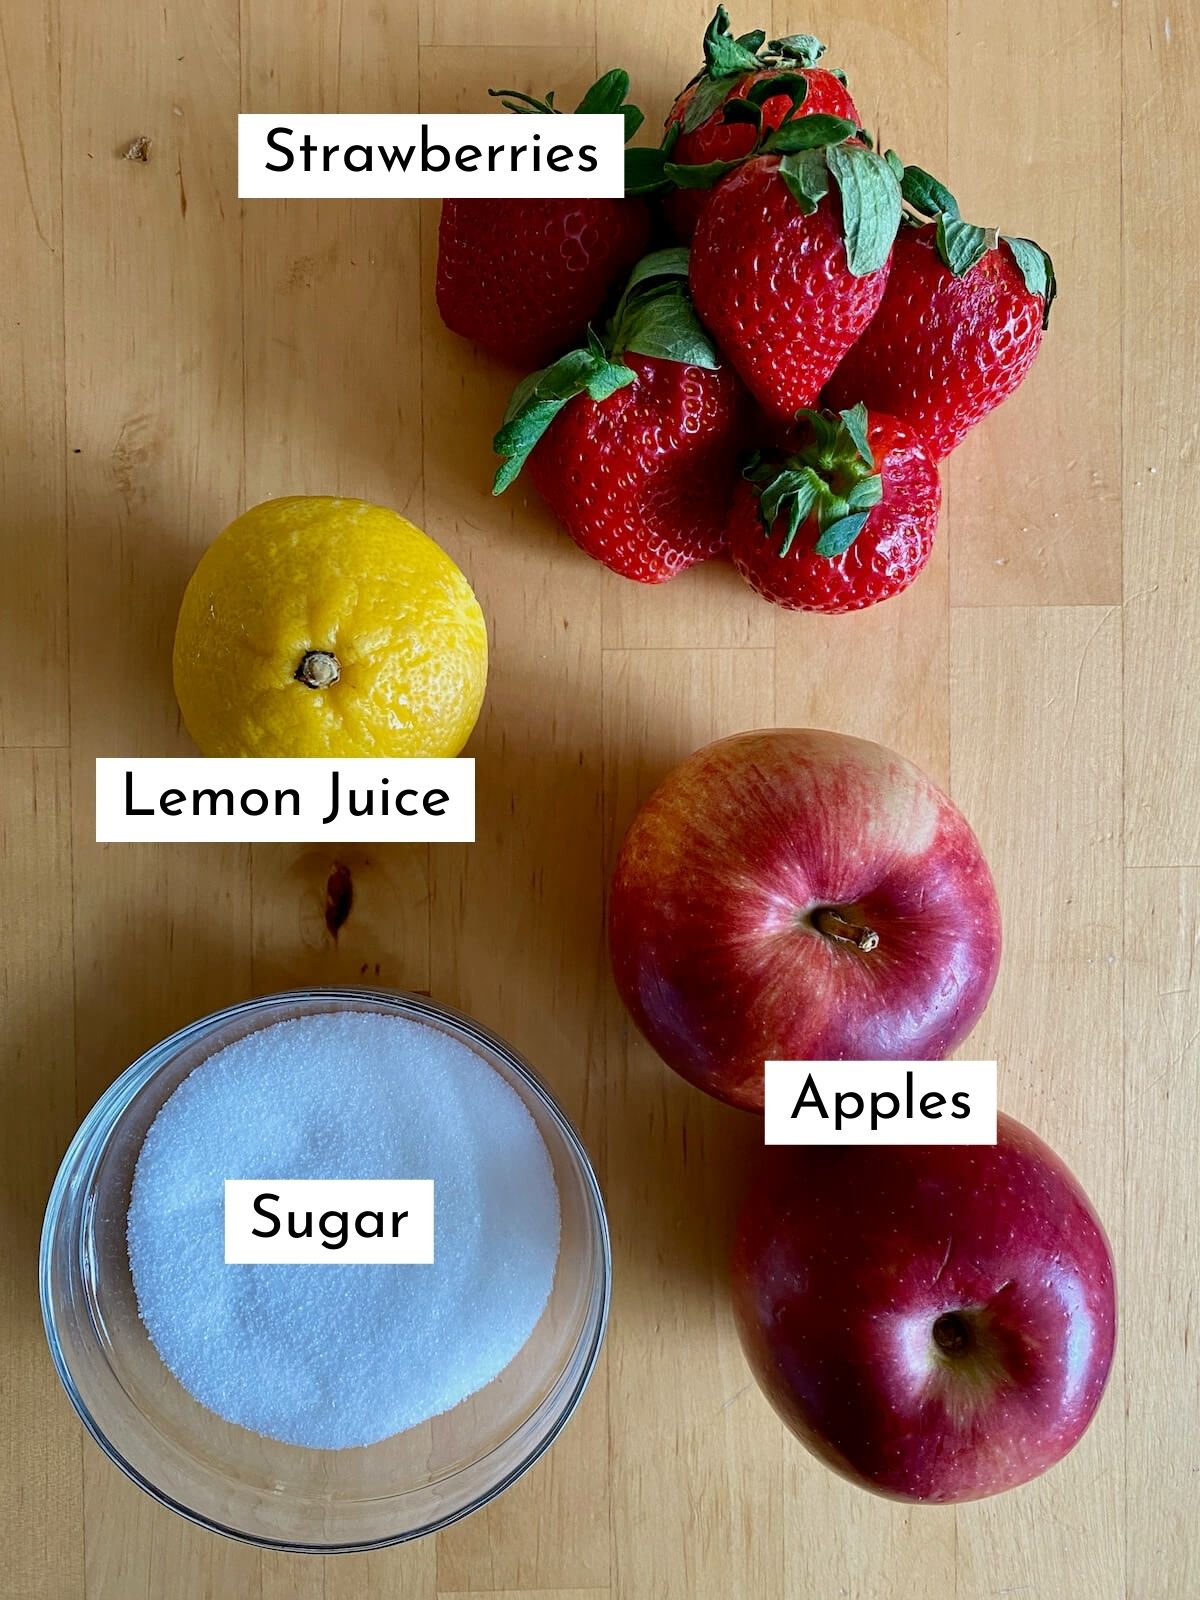 The ingredients to make strawberry apple jam on a butcher block countertop. Each ingredient is labeled with text describing what it is. They include strawberries, lemon juice, sugar, and apples.